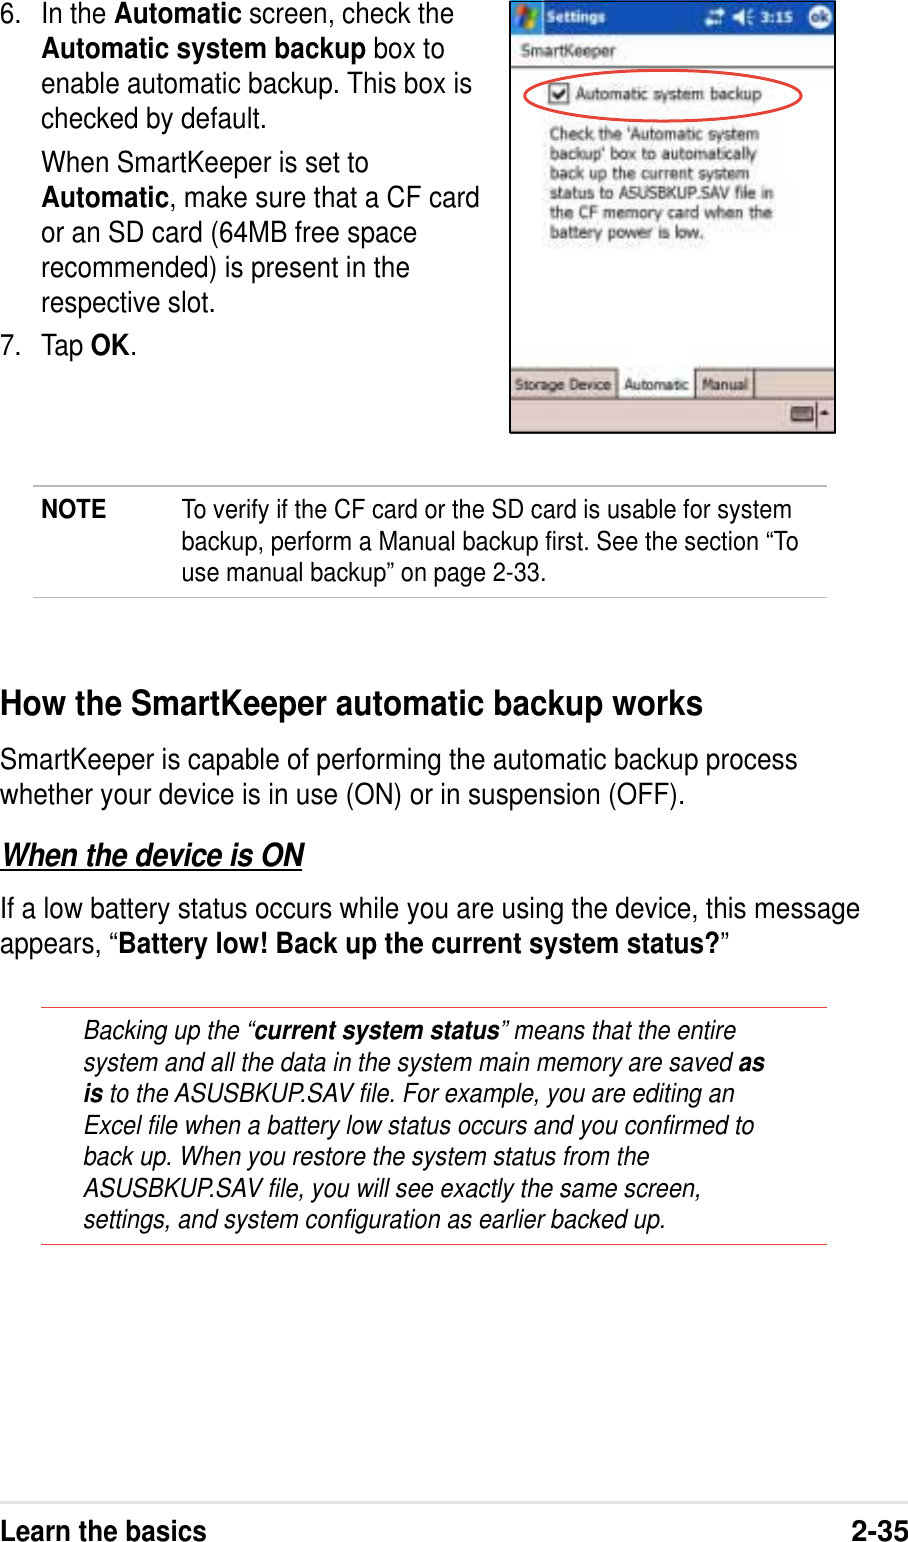 Learn the basics2-356. In the Automatic screen, check theAutomatic system backup box toenable automatic backup. This box ischecked by default.When SmartKeeper is set toAutomatic, make sure that a CF cardor an SD card (64MB free spacerecommended) is present in therespective slot.7. Tap OK.NOTE To verify if the CF card or the SD card is usable for systembackup, perform a Manual backup first. See the section “Touse manual backup” on page 2-33.How the SmartKeeper automatic backup worksSmartKeeper is capable of performing the automatic backup processwhether your device is in use (ON) or in suspension (OFF).When the device is ONIf a low battery status occurs while you are using the device, this messageappears, “Battery low! Back up the current system status?”Backing up the “current system status” means that the entiresystem and all the data in the system main memory are saved asis to the ASUSBKUP.SAV file. For example, you are editing anExcel file when a battery low status occurs and you confirmed toback up. When you restore the system status from theASUSBKUP.SAV file, you will see exactly the same screen,settings, and system configuration as earlier backed up.